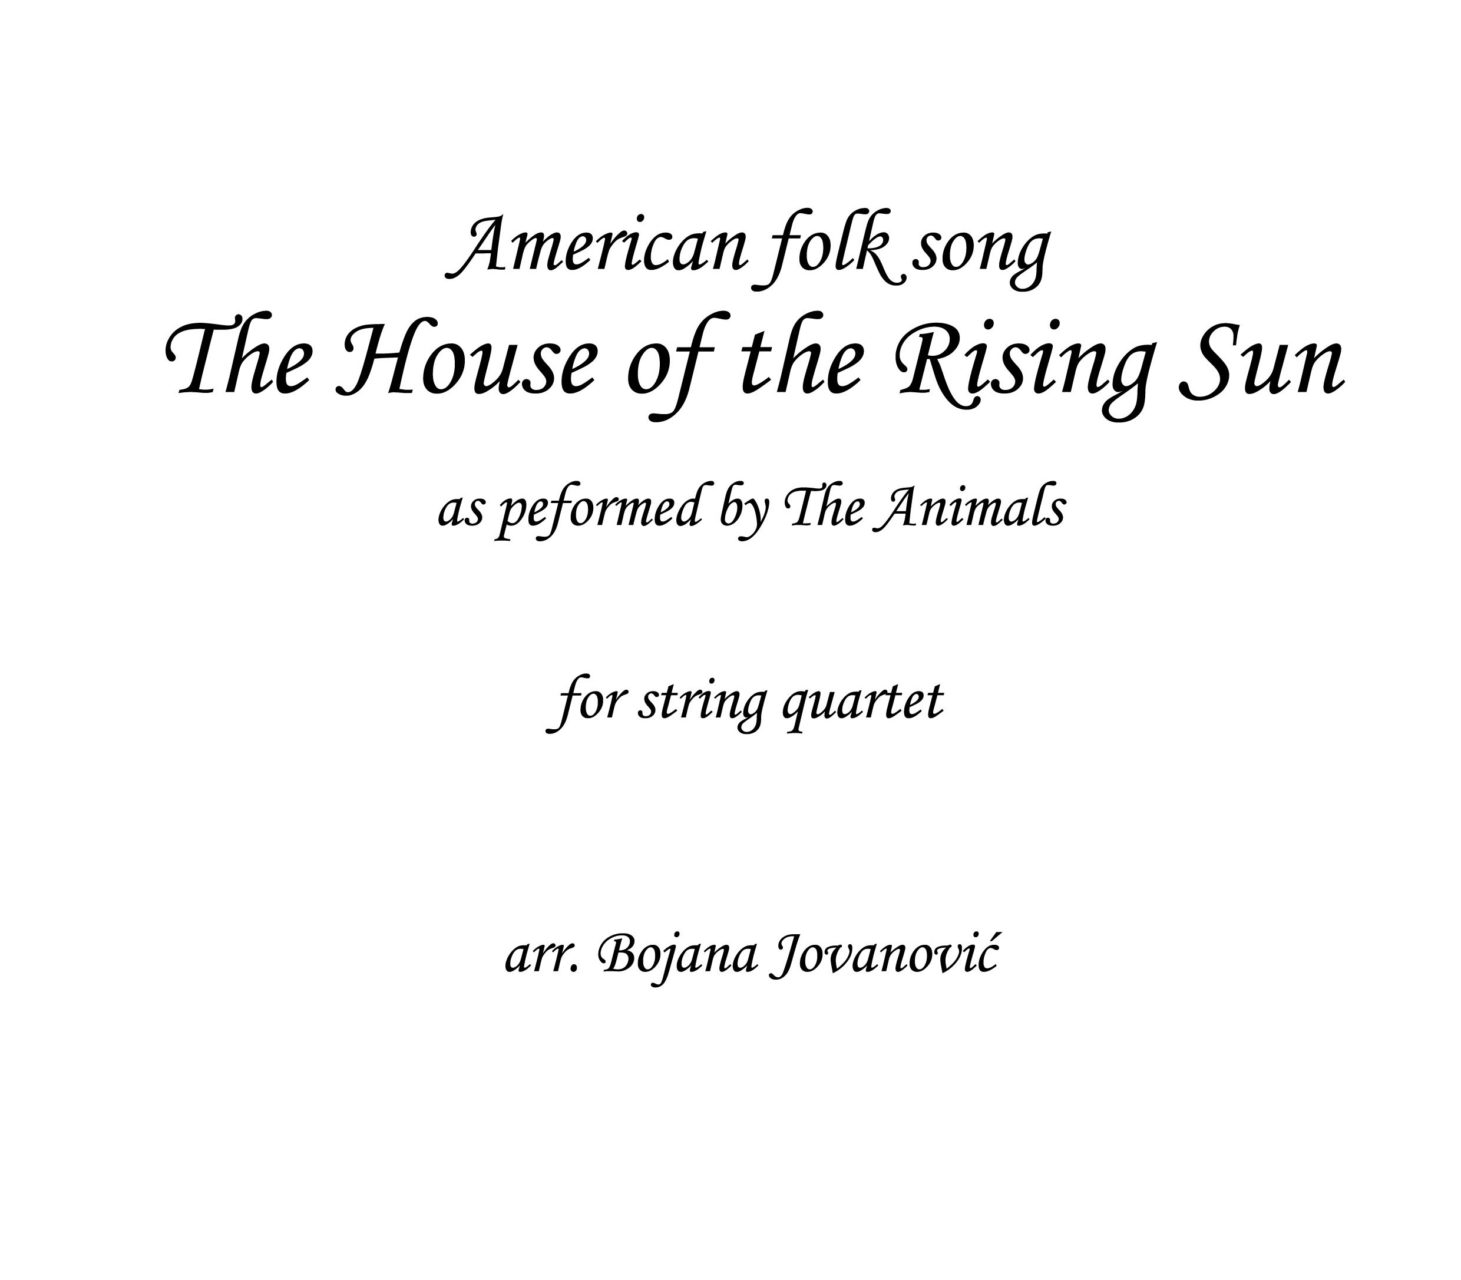 House of the rising sun Sheet music - The Animals - for String Quartet